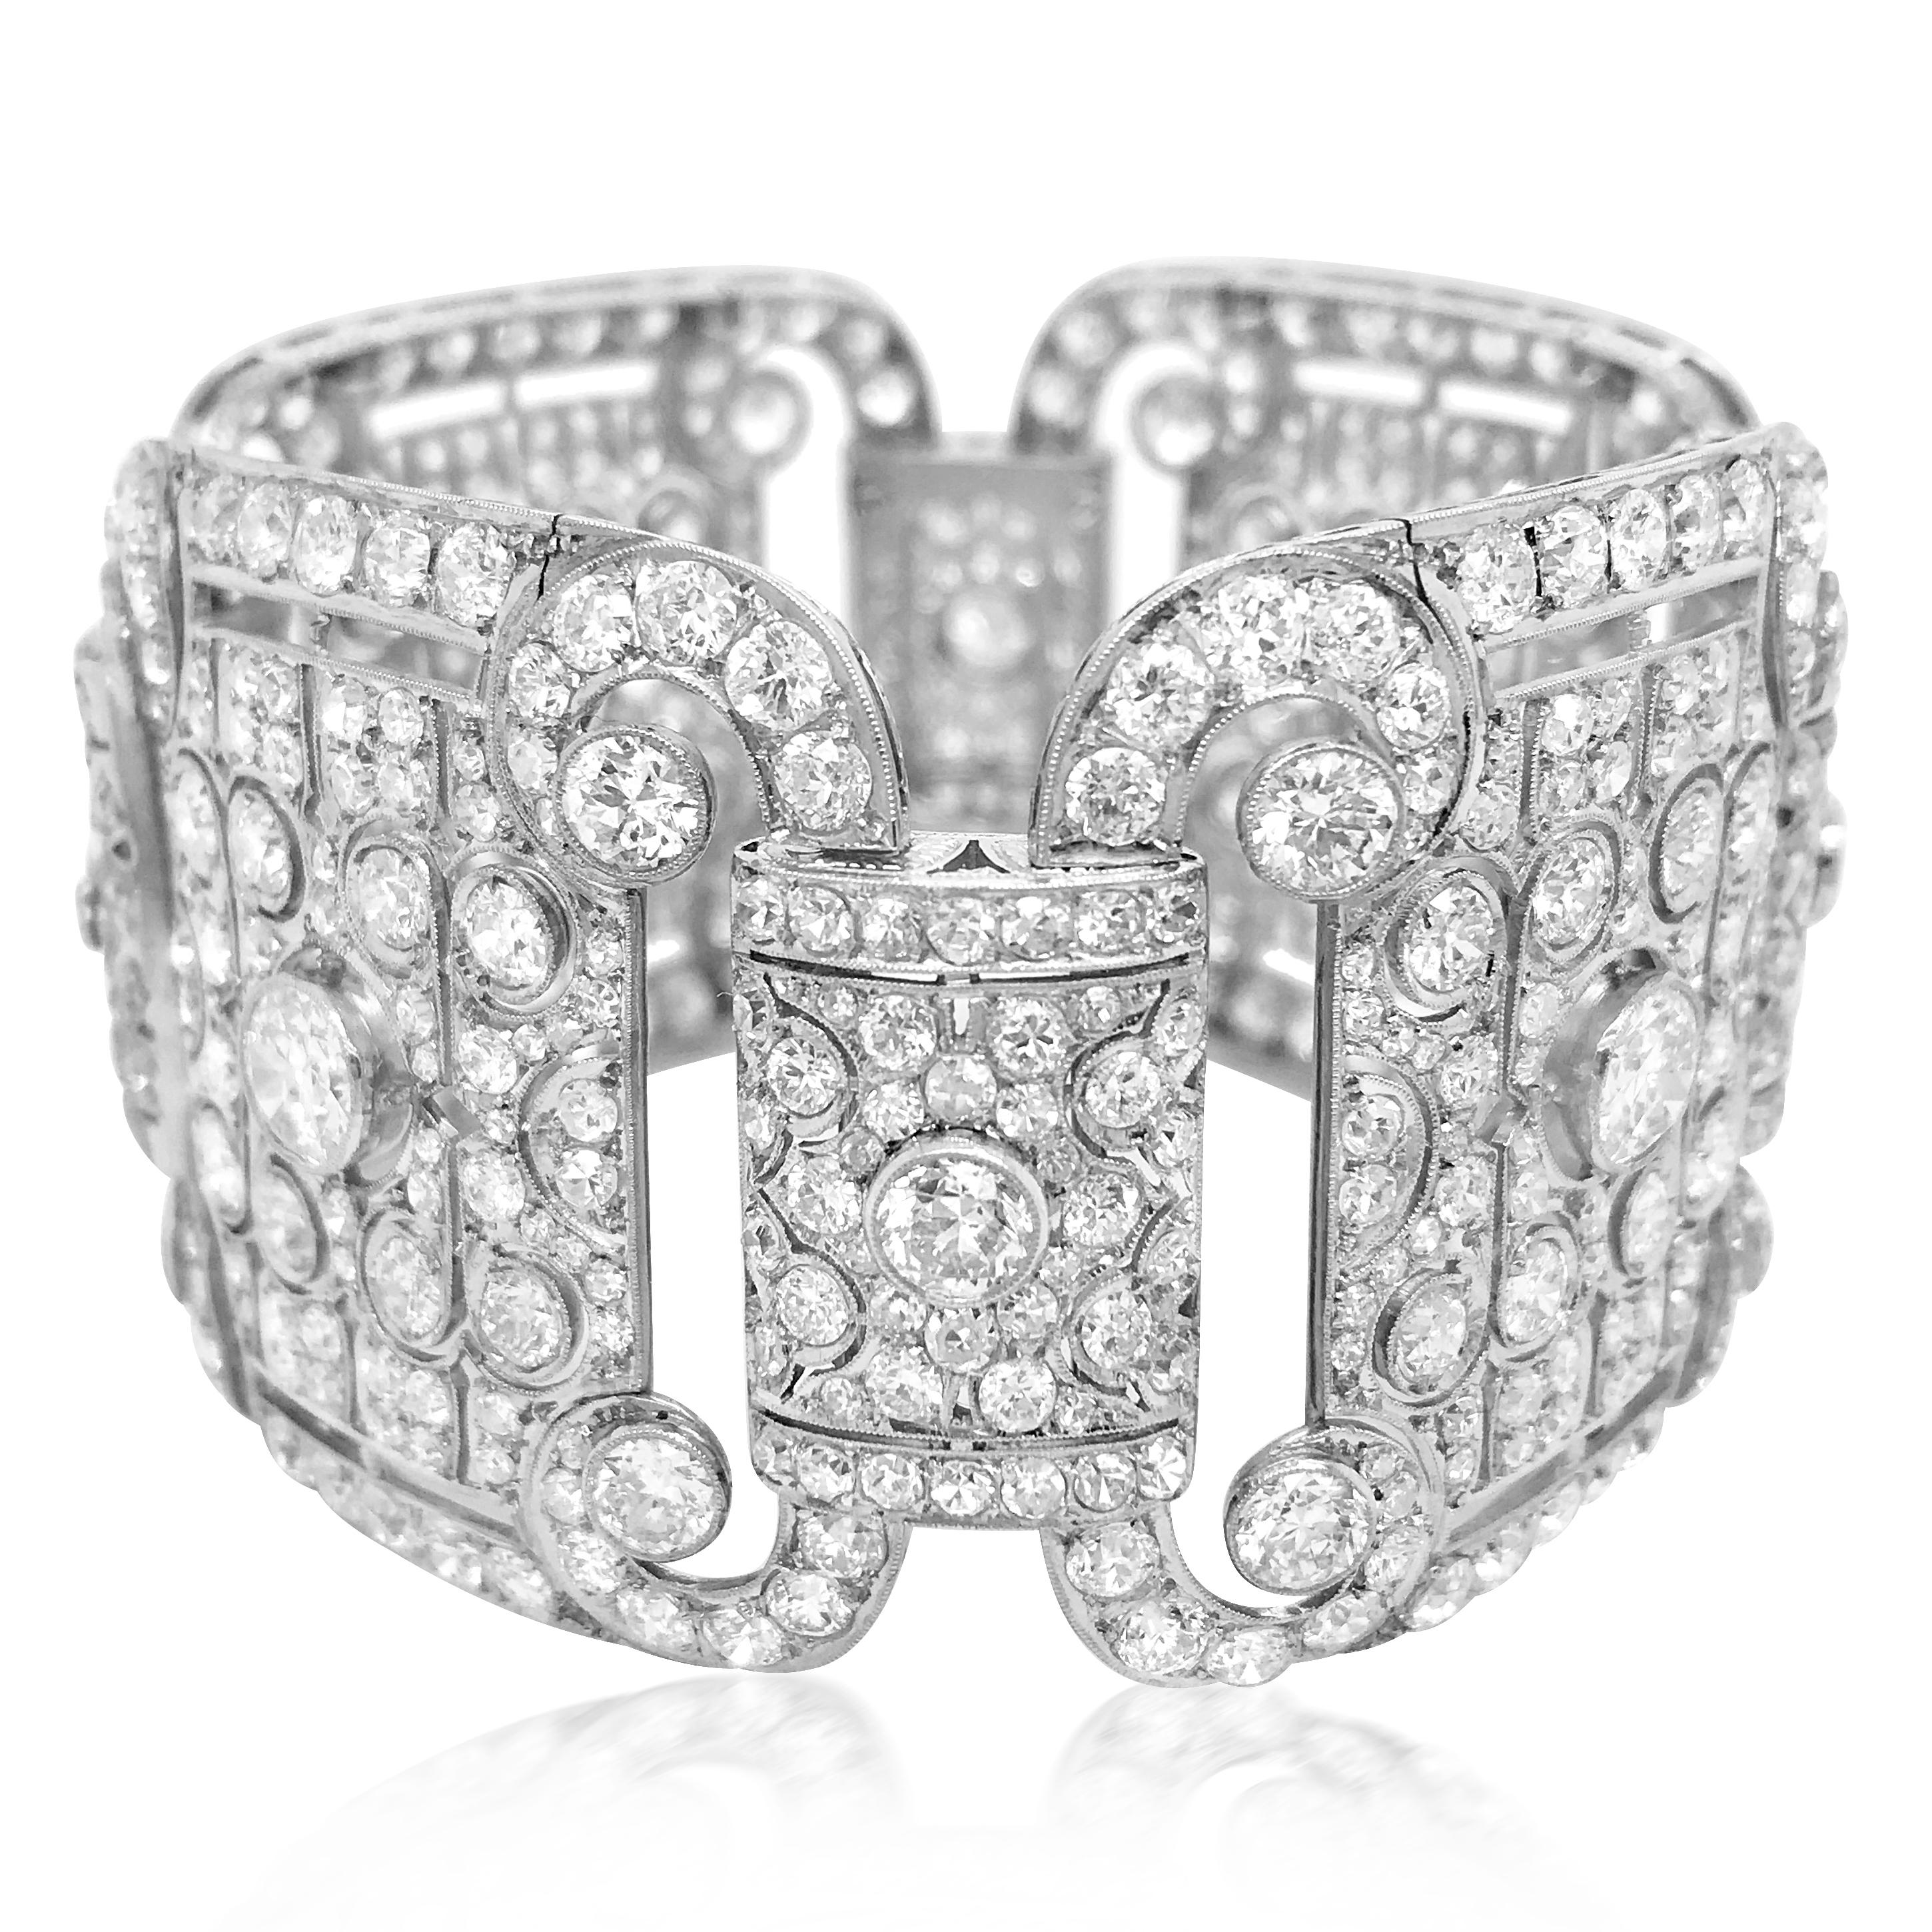 This captivating antique diamond link bracelet characterizing the most elegant wrist ornament is crafted in solid platinum, weighs 89.12 grams and measures 18cm (7.08 inches) long and 40mm (1.57 inches) wide. It incorporates four quintessentially